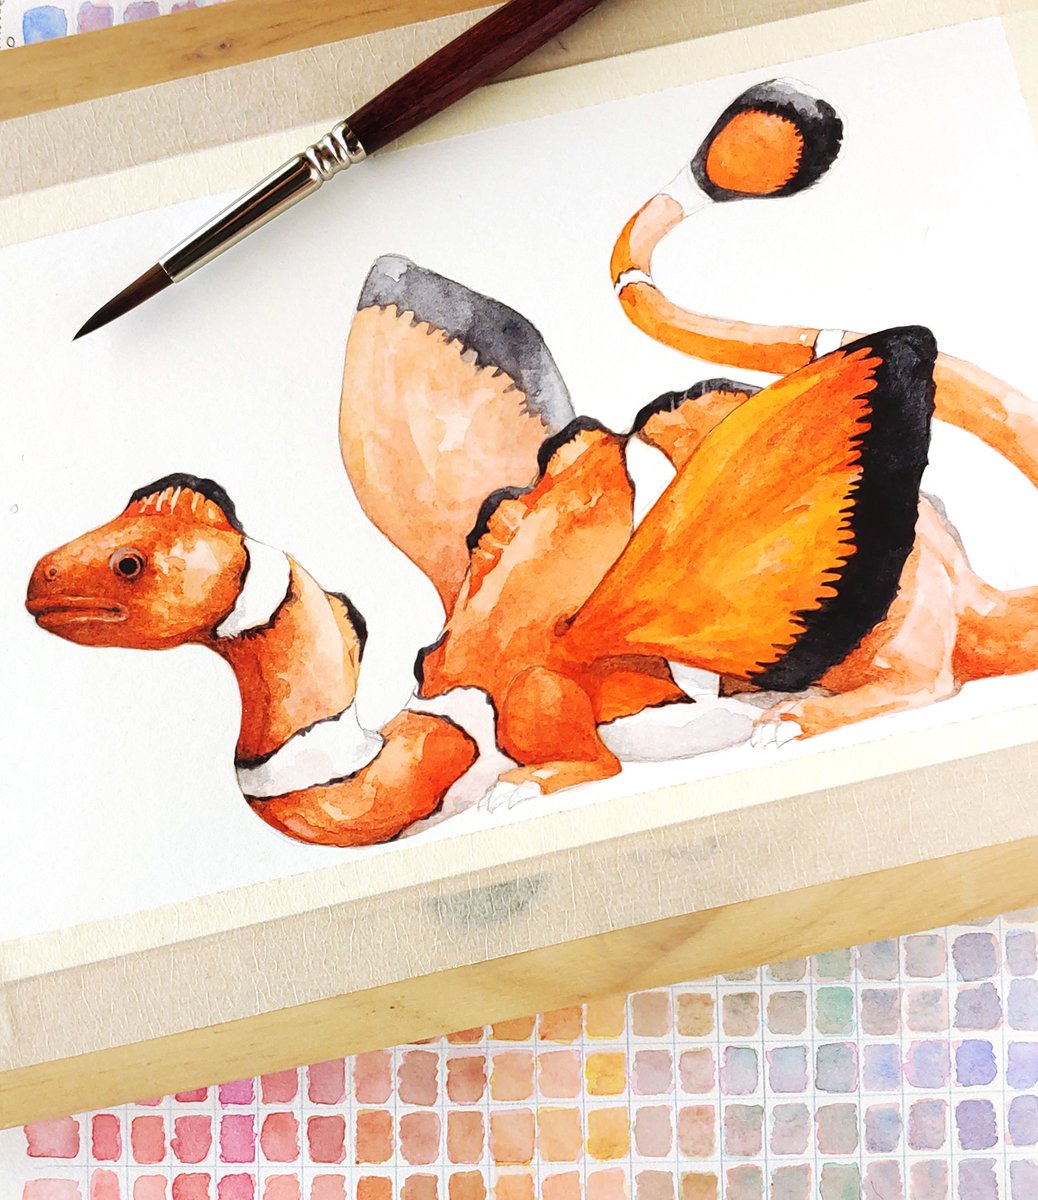 I'll go first! I've been drawing this little orange boy (a Clownfish Dragon) over the last couple days. Some sketches first, now watercolor and gouache! Still a  #wip Tagging:  @ViiMorteArt  @magical_scope  @jimmyt_art  @daffnee_  @Marcel_Hampel  @ArtofYorugami  @artofdel